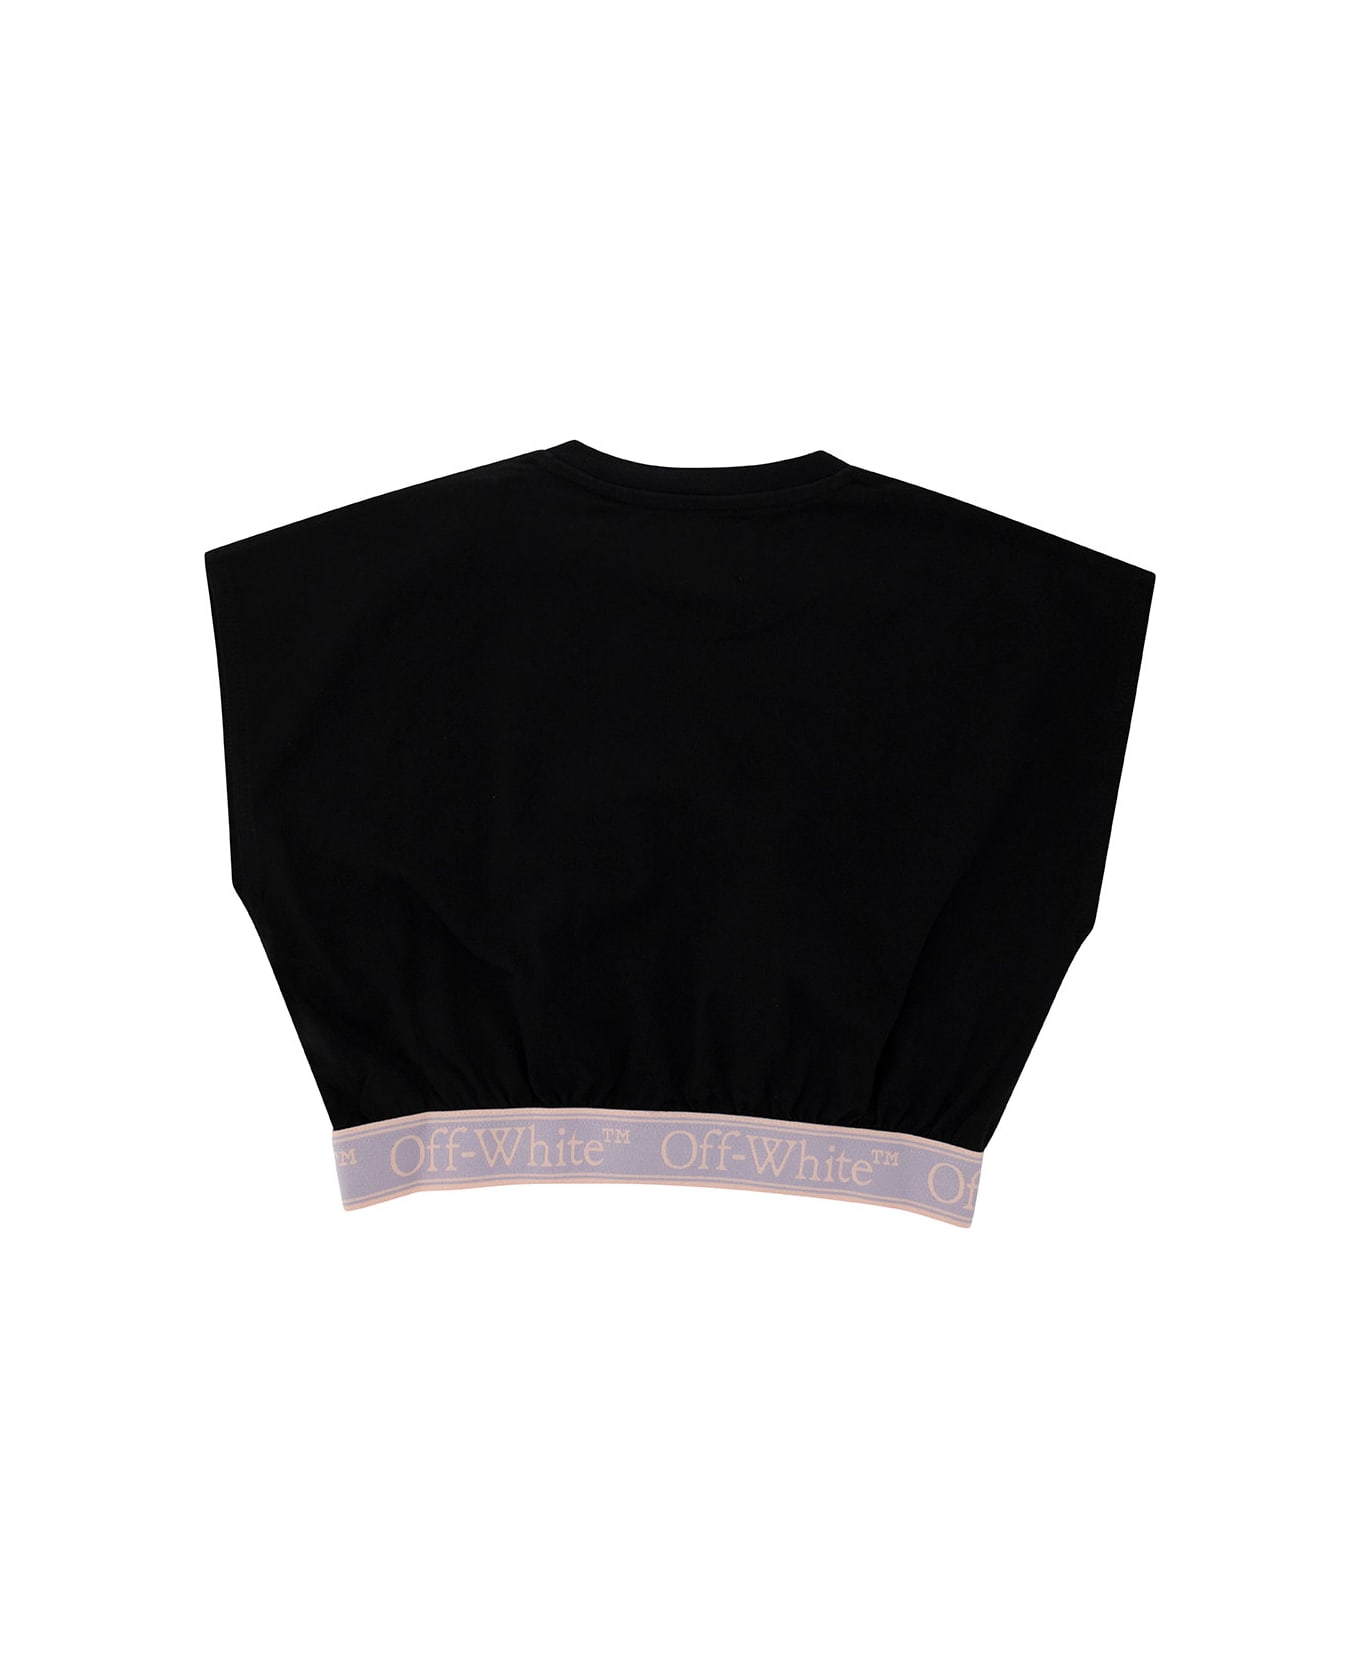 Off-White Black Crop Top With Branded Band In Cotton Girl - Black